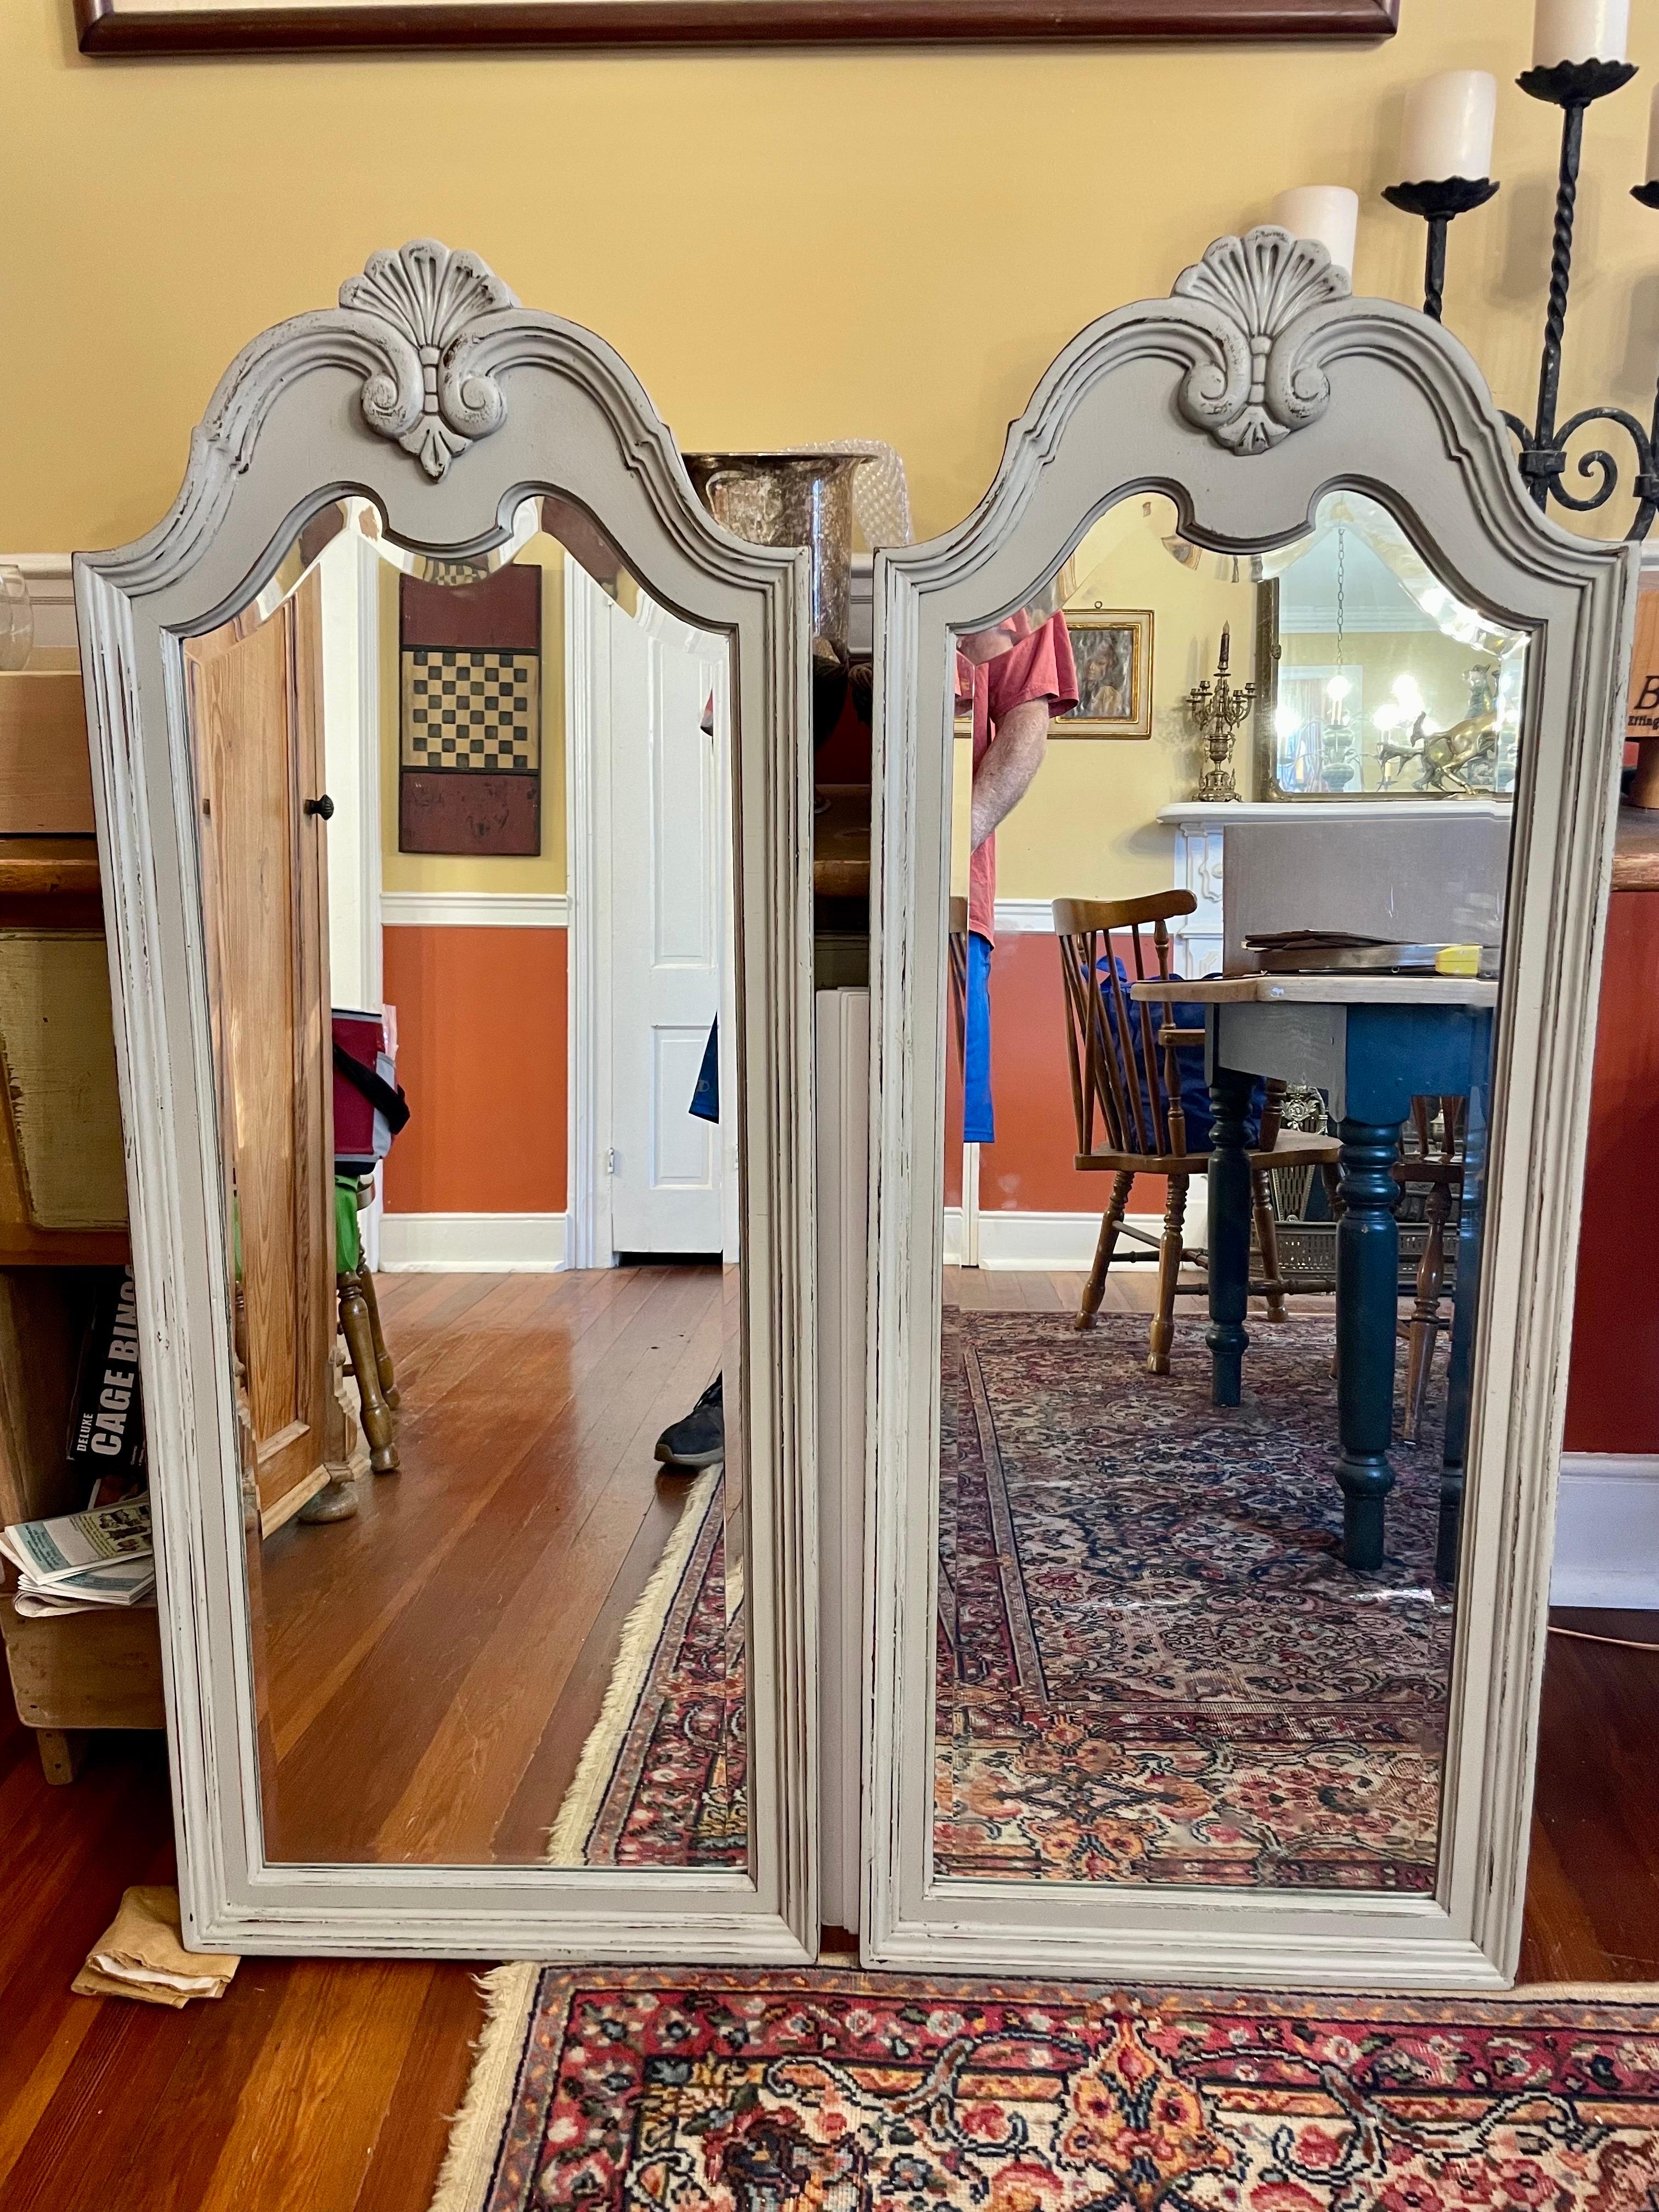 Pair of large carved painted beveled Hollywood Regency mirrors with grey painted distressed finish. Large scale. Some wear to finish from age and use. 1970's, painted more recently. Great detail highlighted by distressed finish.